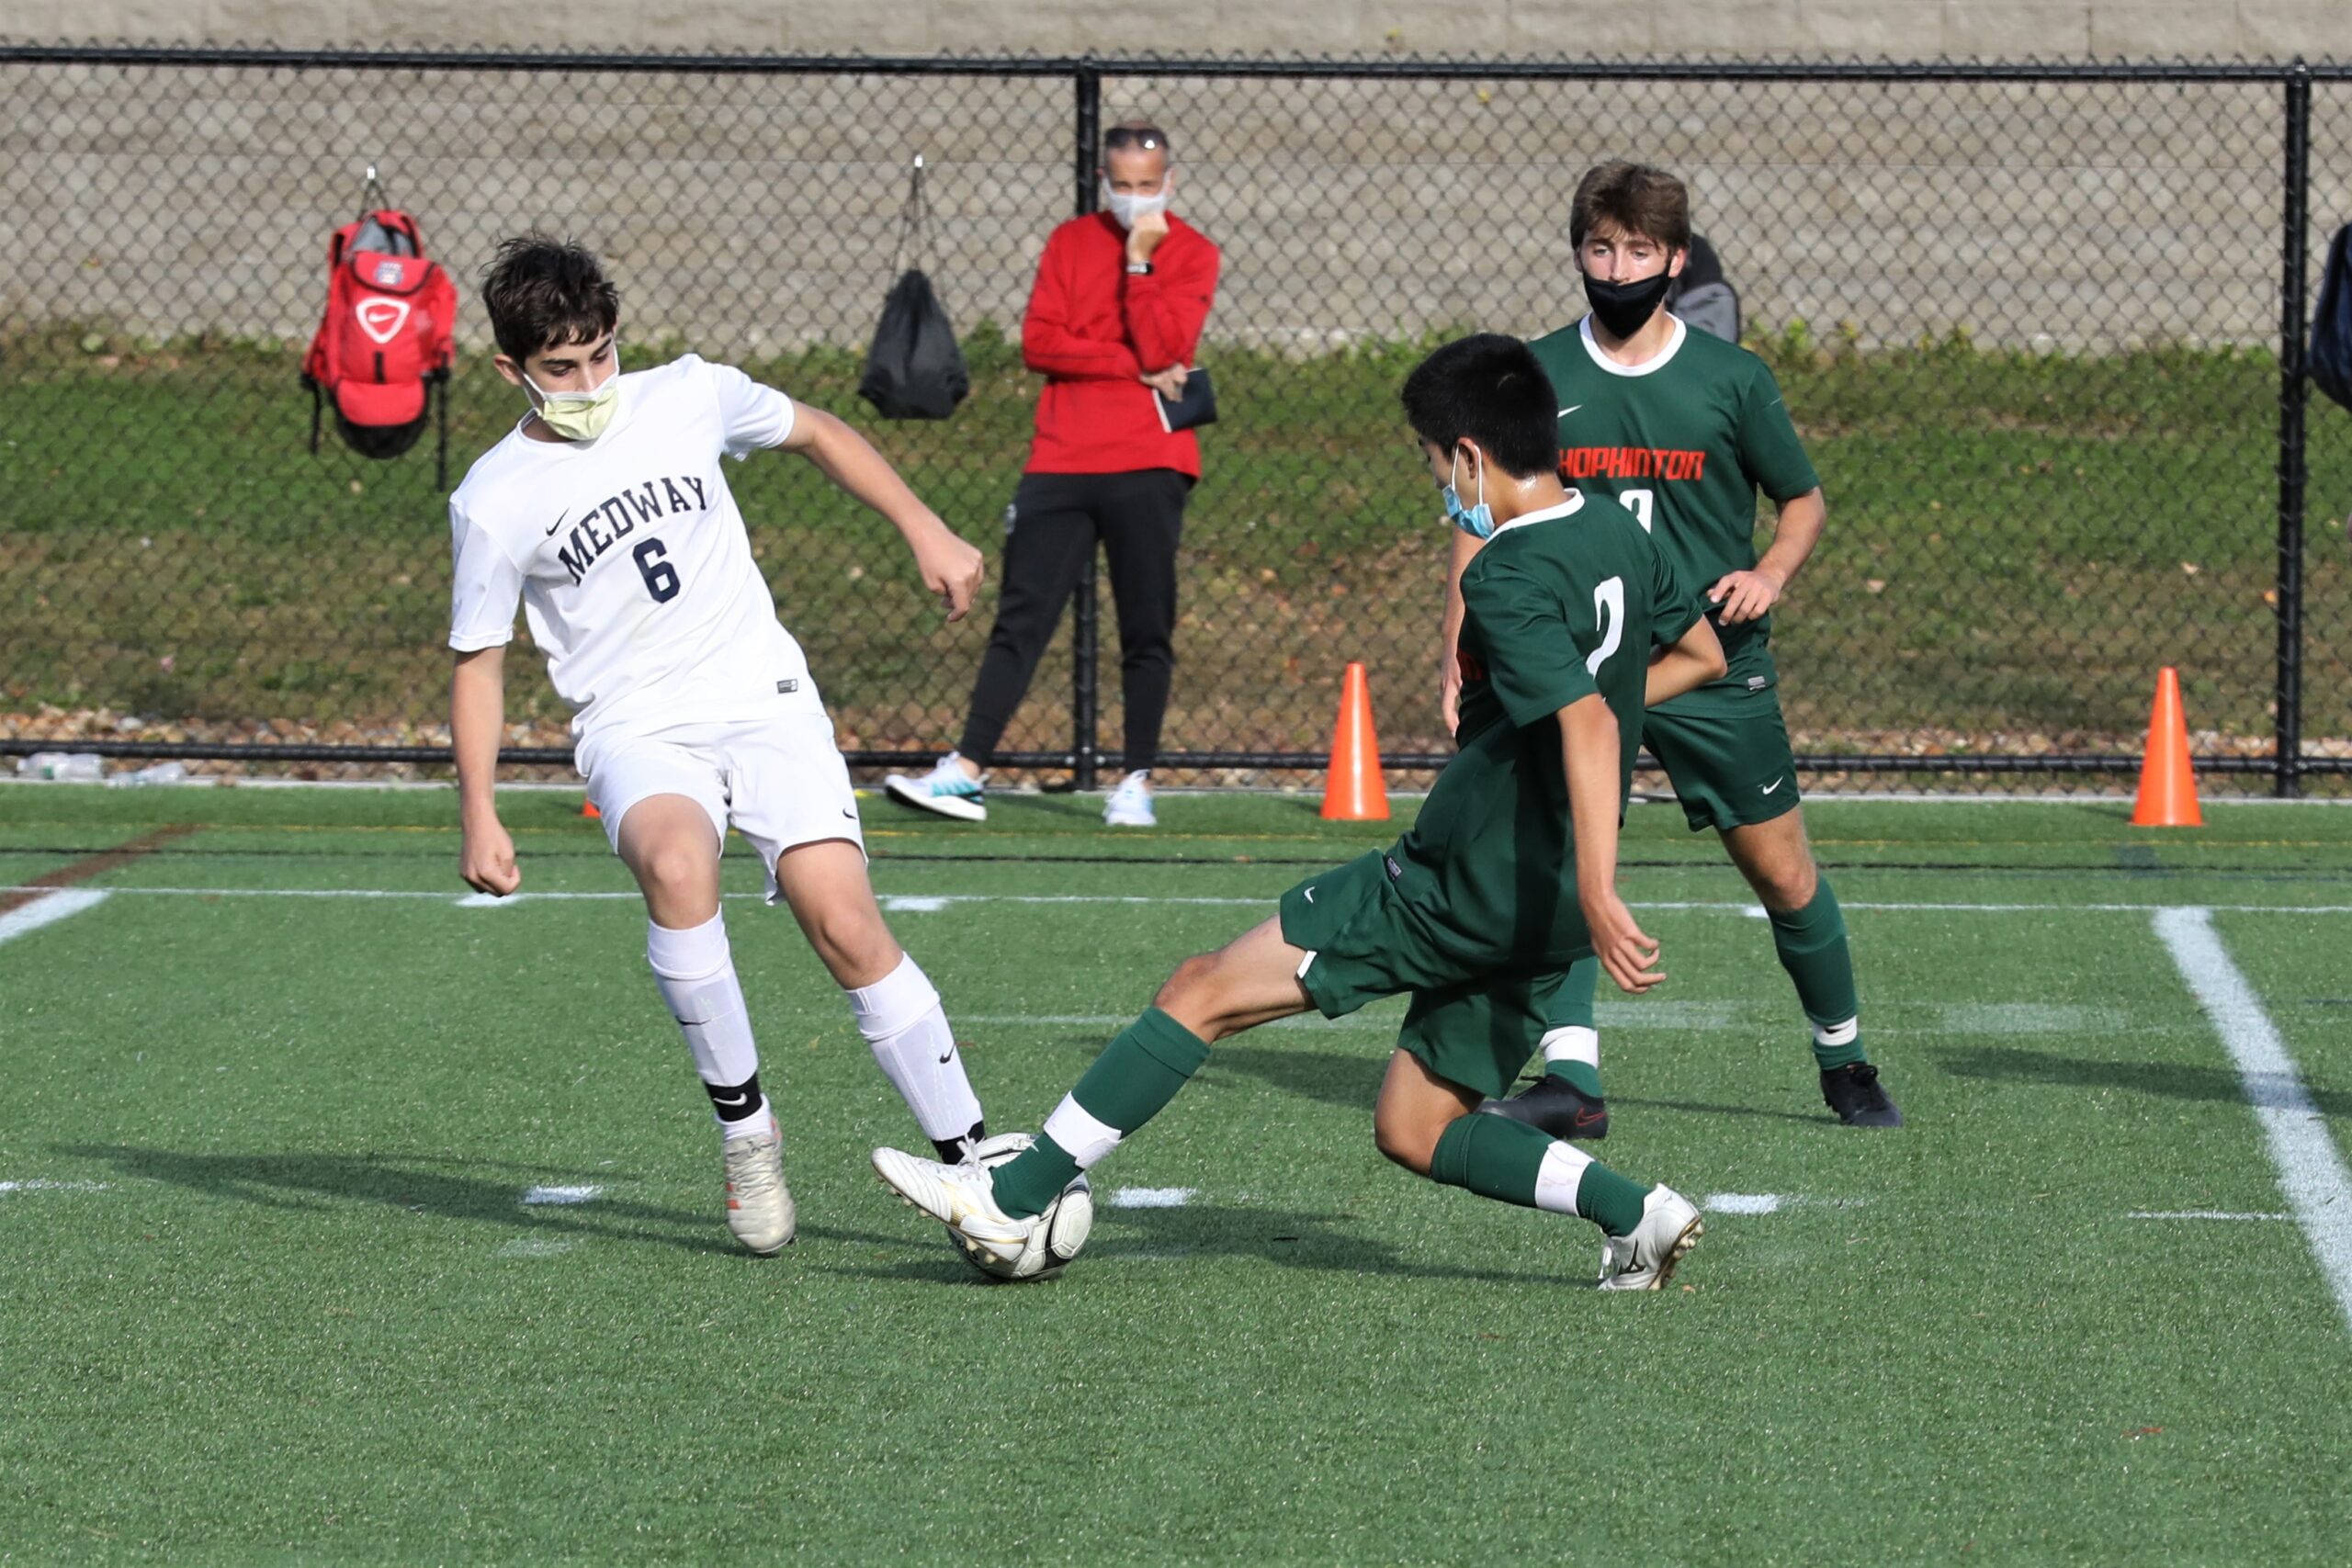 Hillers boys soccer enjoys chance to compete